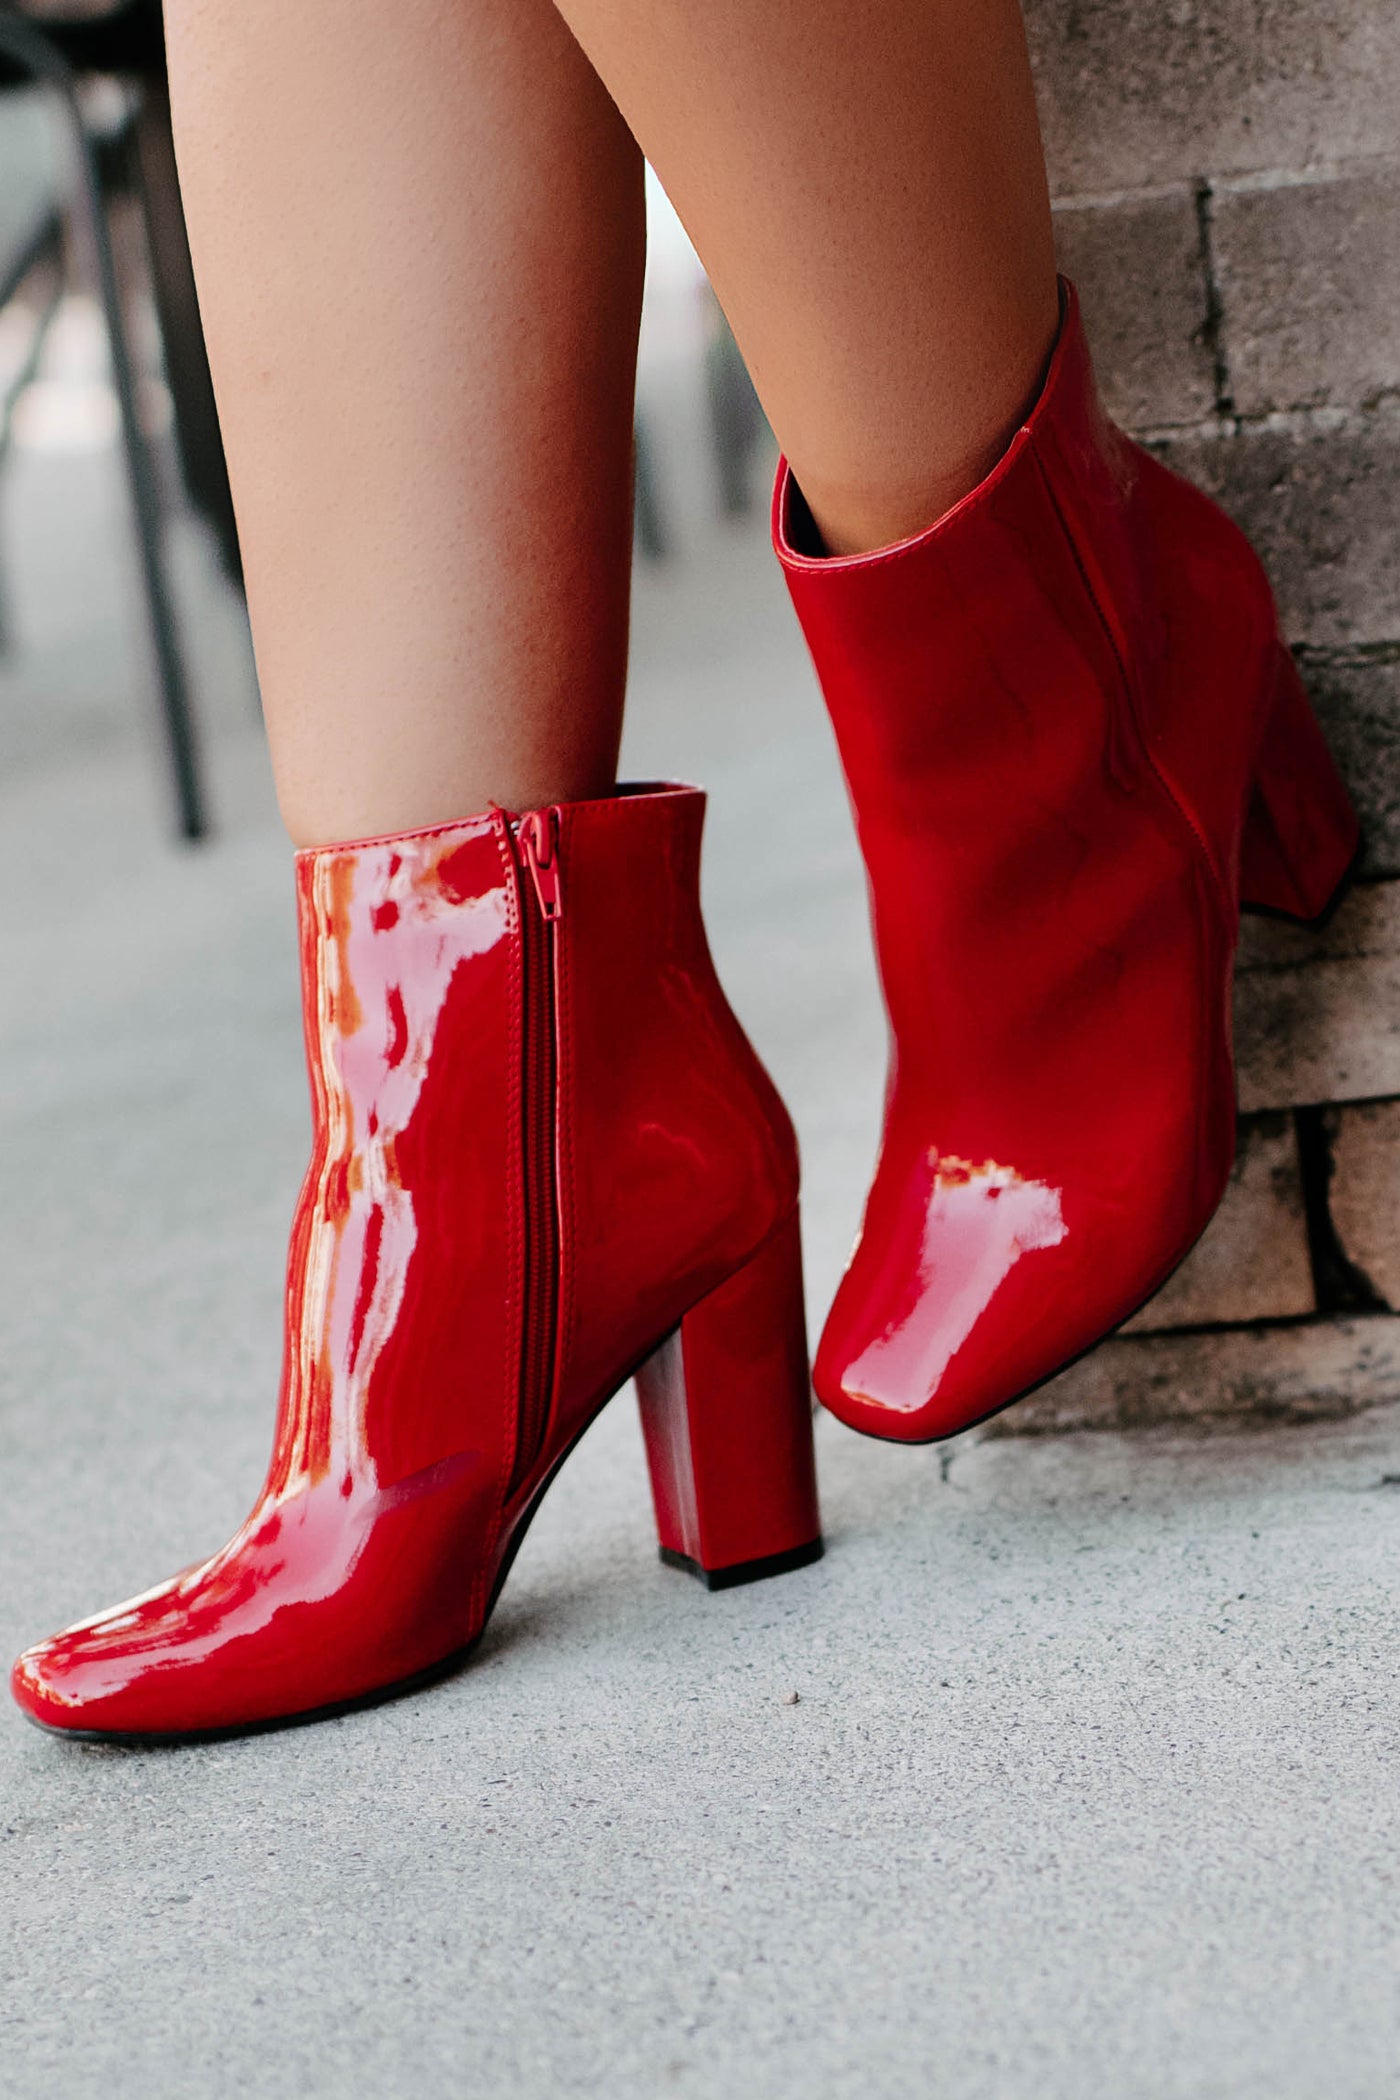 Show Up & Show Off Patent Leather Heeled Ankle Booties (Red) - NanaMacs